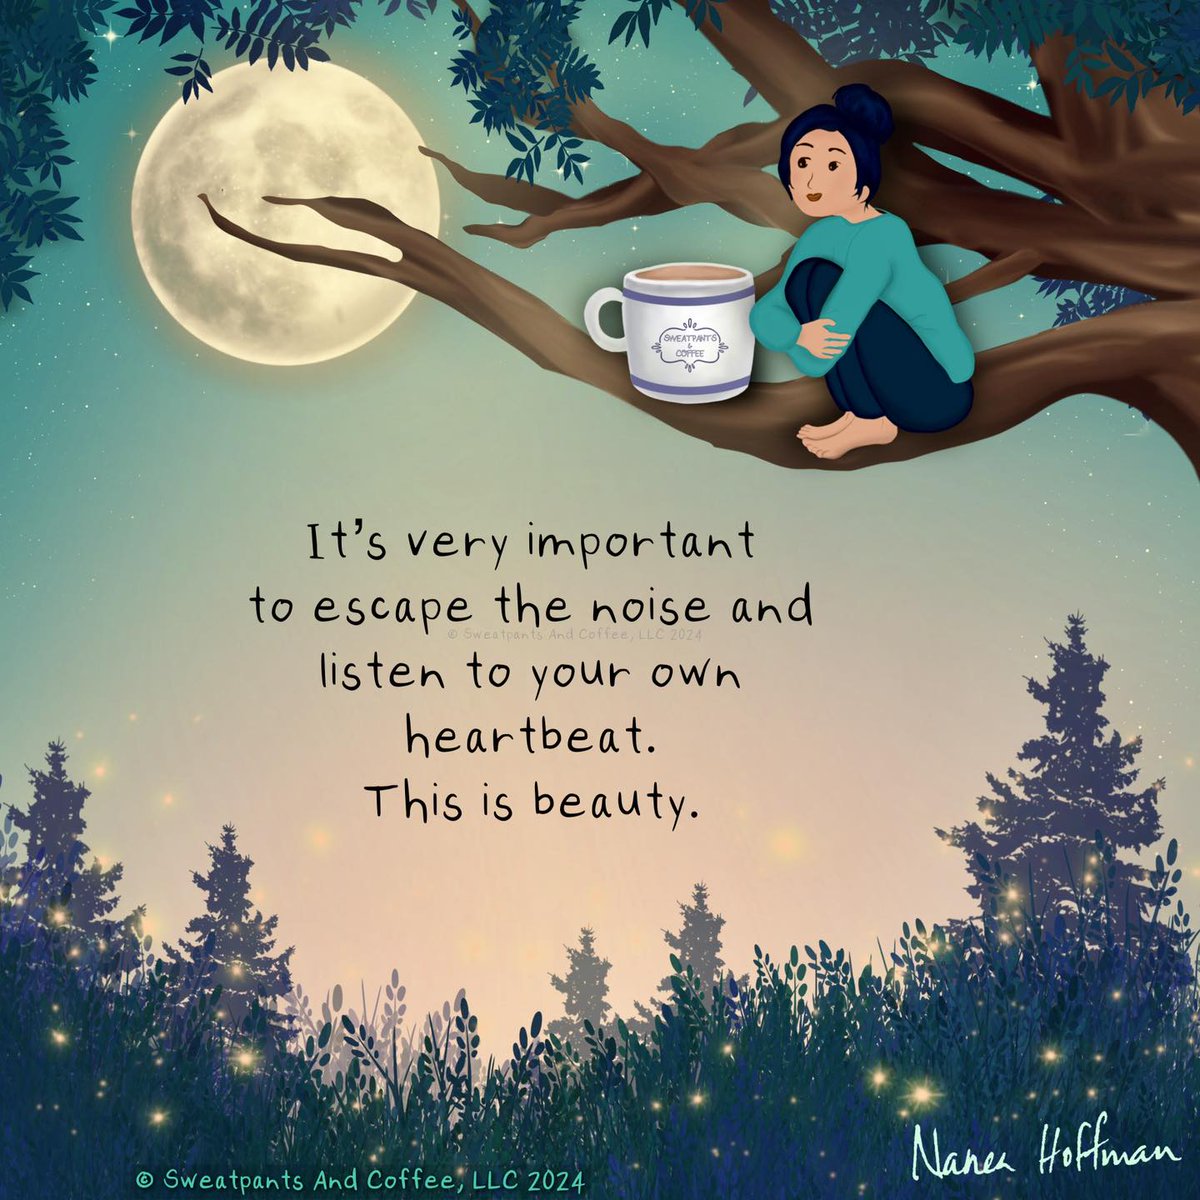 It's very important to escape the noise and listen to your own heartbeat. This is beauty, ~ Listen to your beautiful heart. 💙- Nanea Hoffman